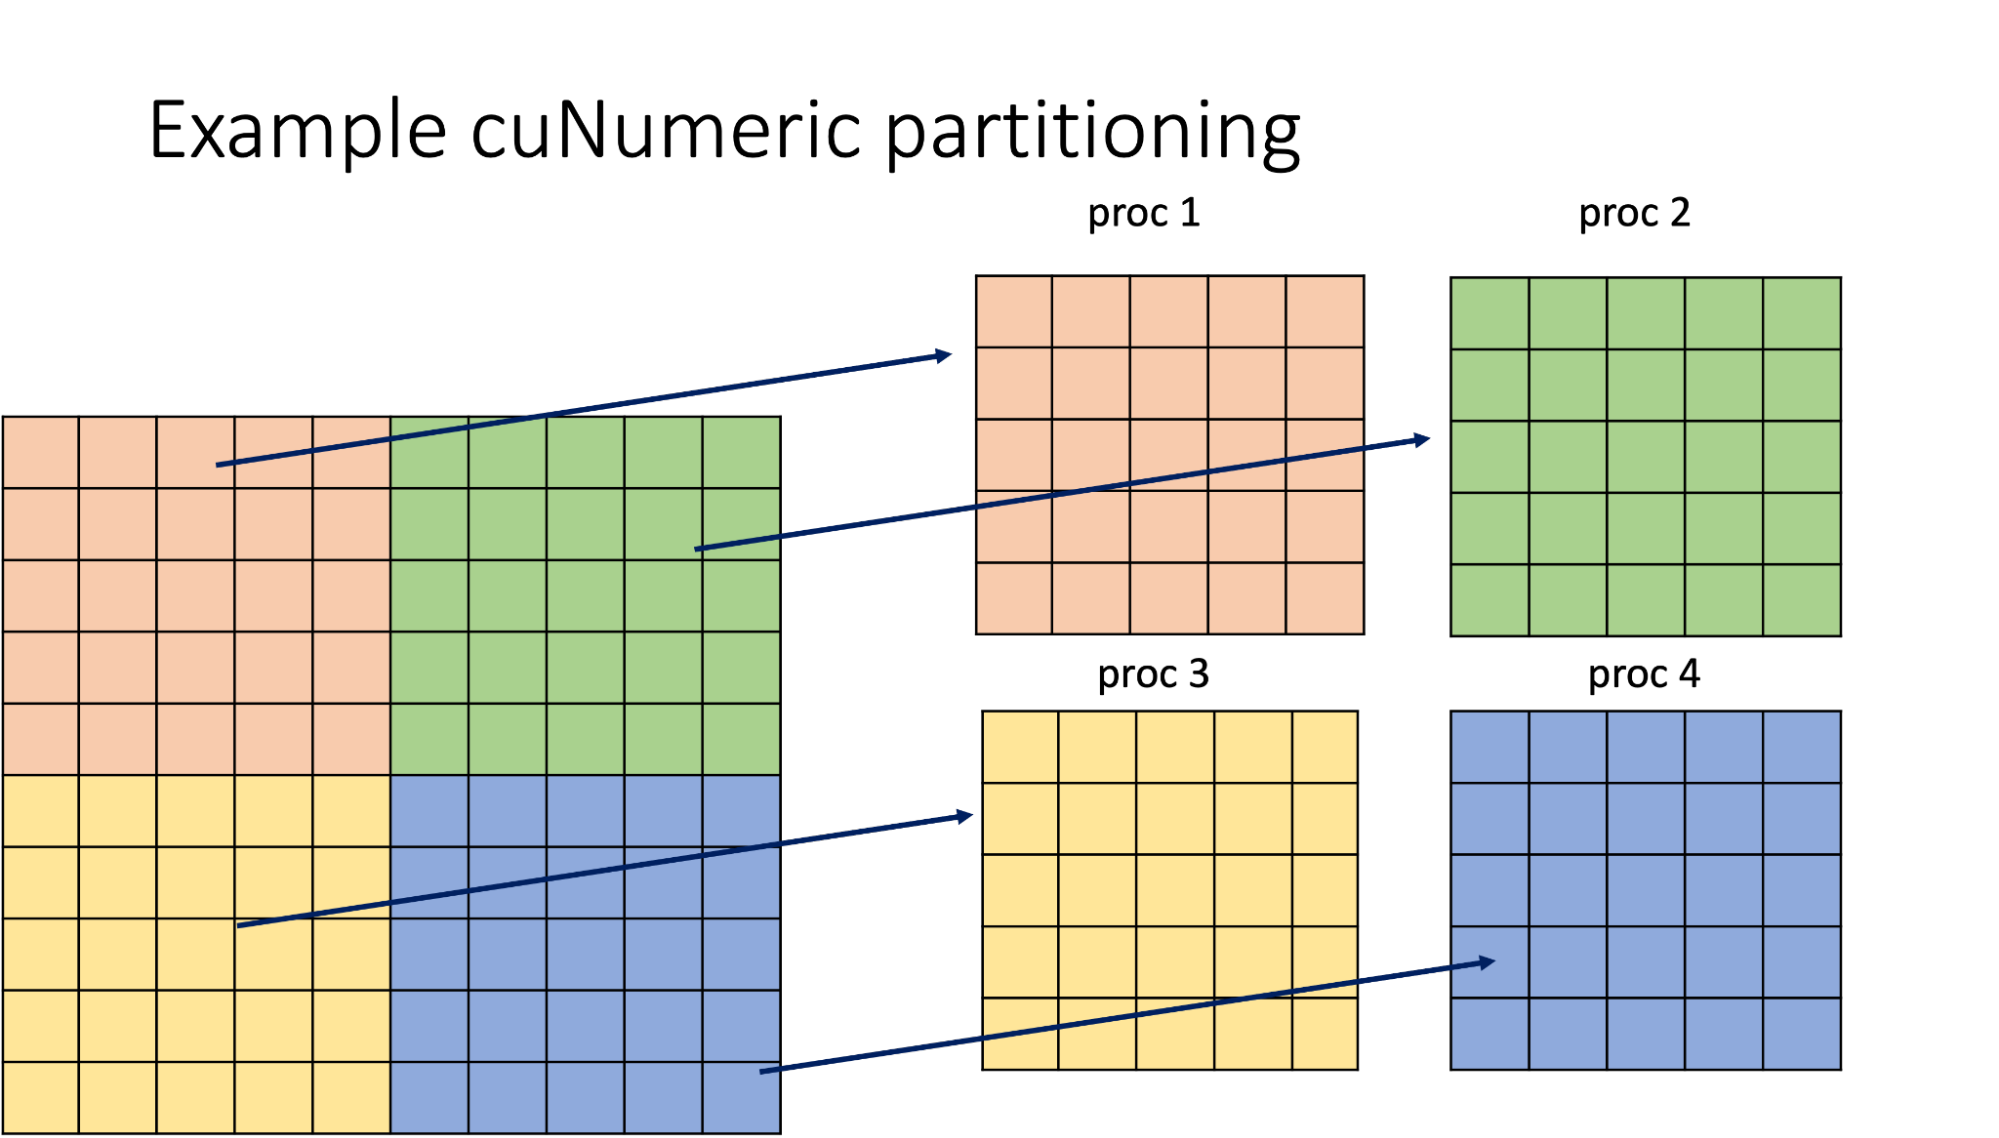 A 4-colored image representing a 10 x 10 matrix that has been equally broken apart into four smaller 5 x 5 matrices to illustrate how cuNumeric partitions data to be processed in parallel. 